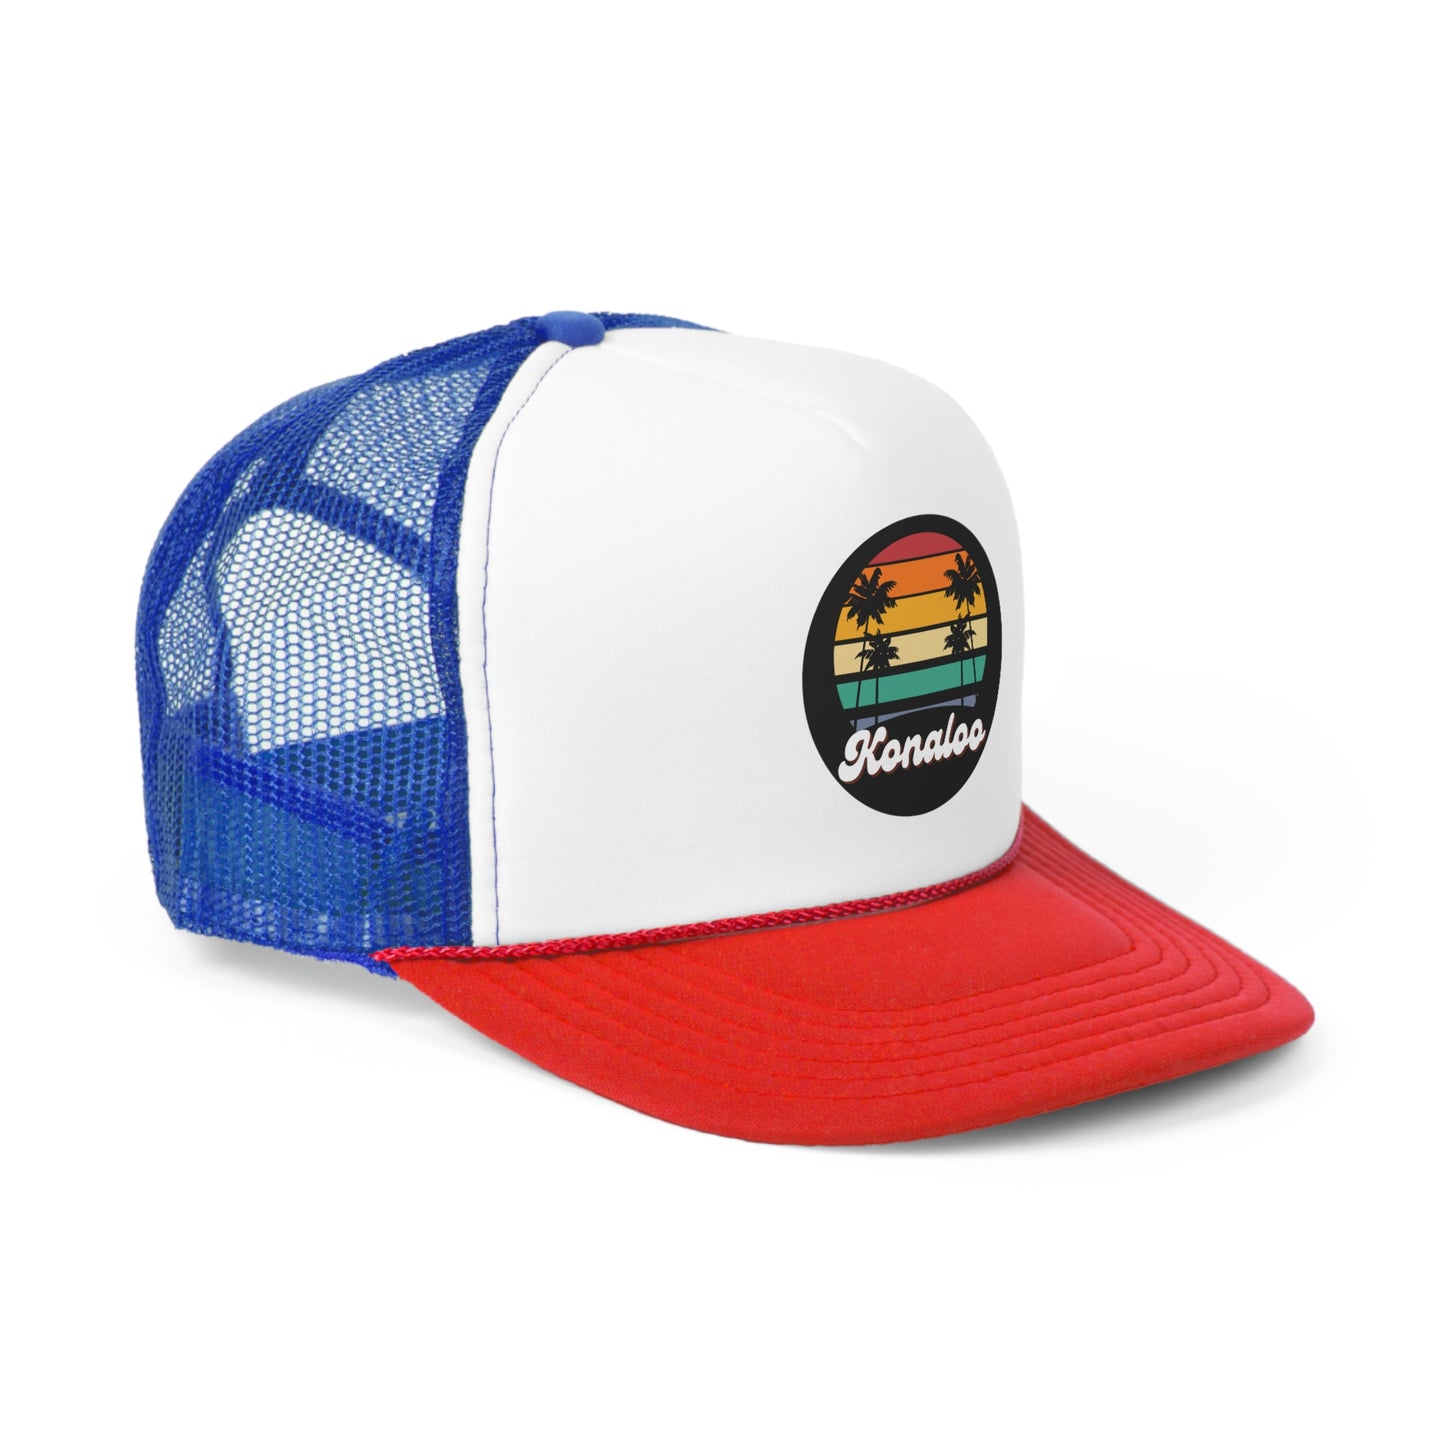 Hat Get Your Retro Vibes On with Our Trucker Caps - Featuring Palm Tree Shadows